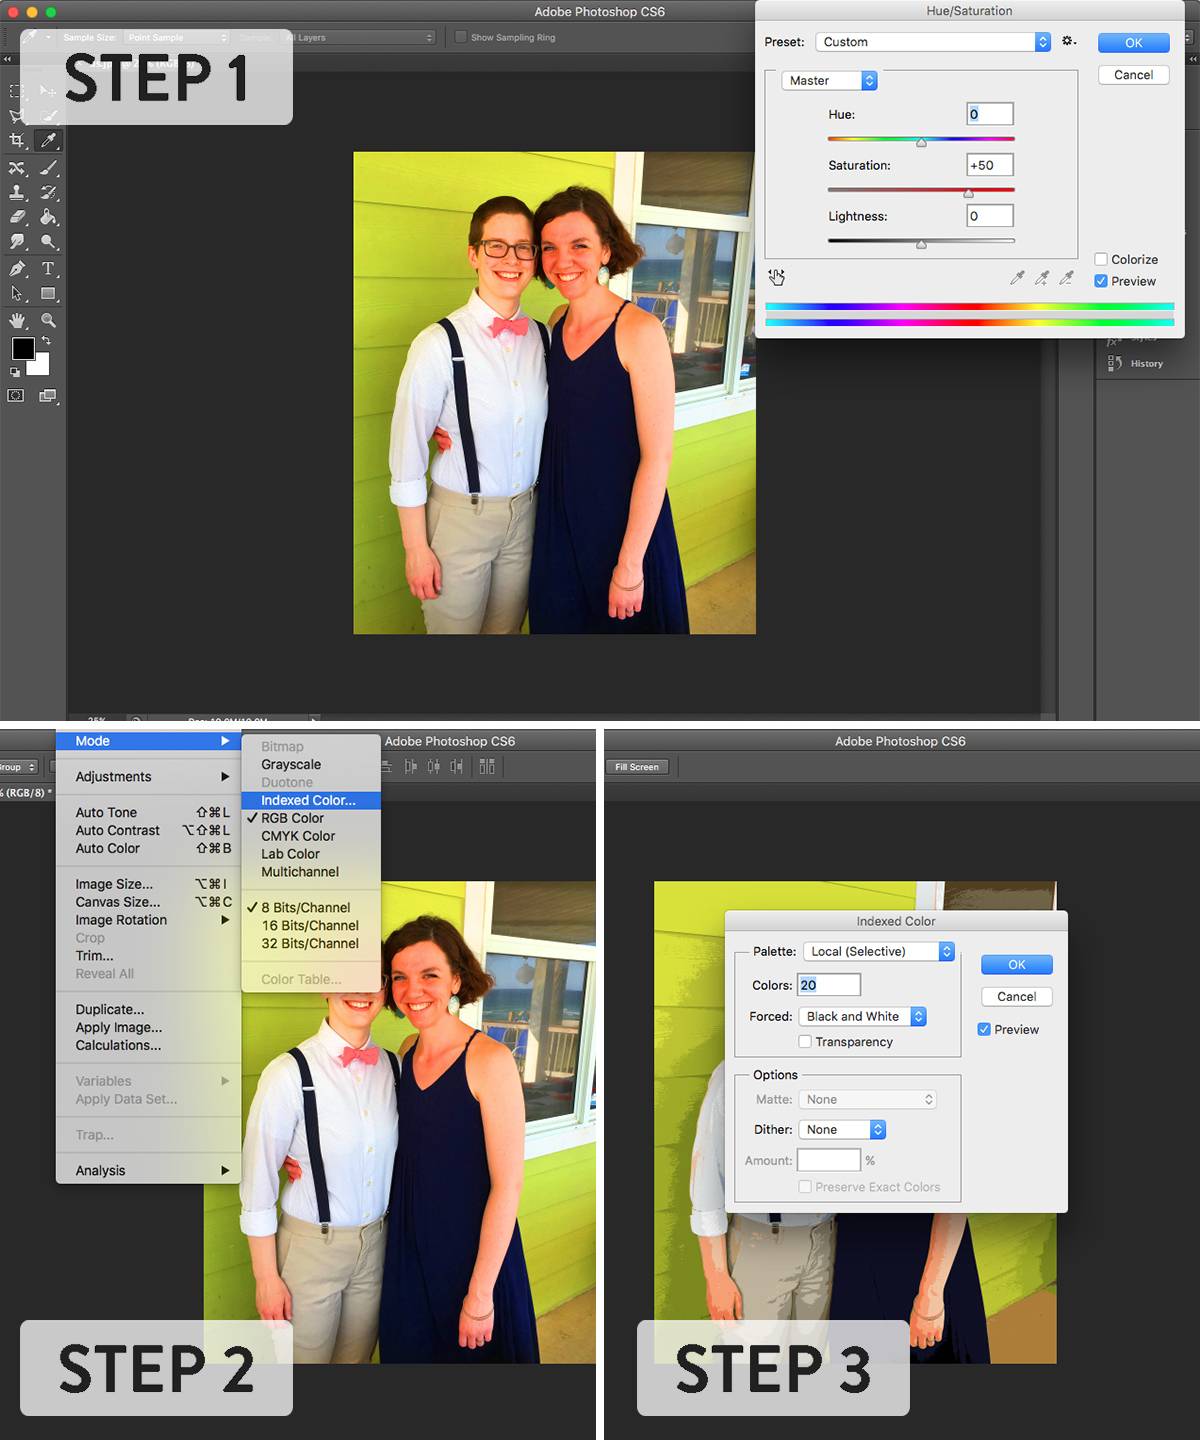 How to use Photoshop to flatten colors in an image